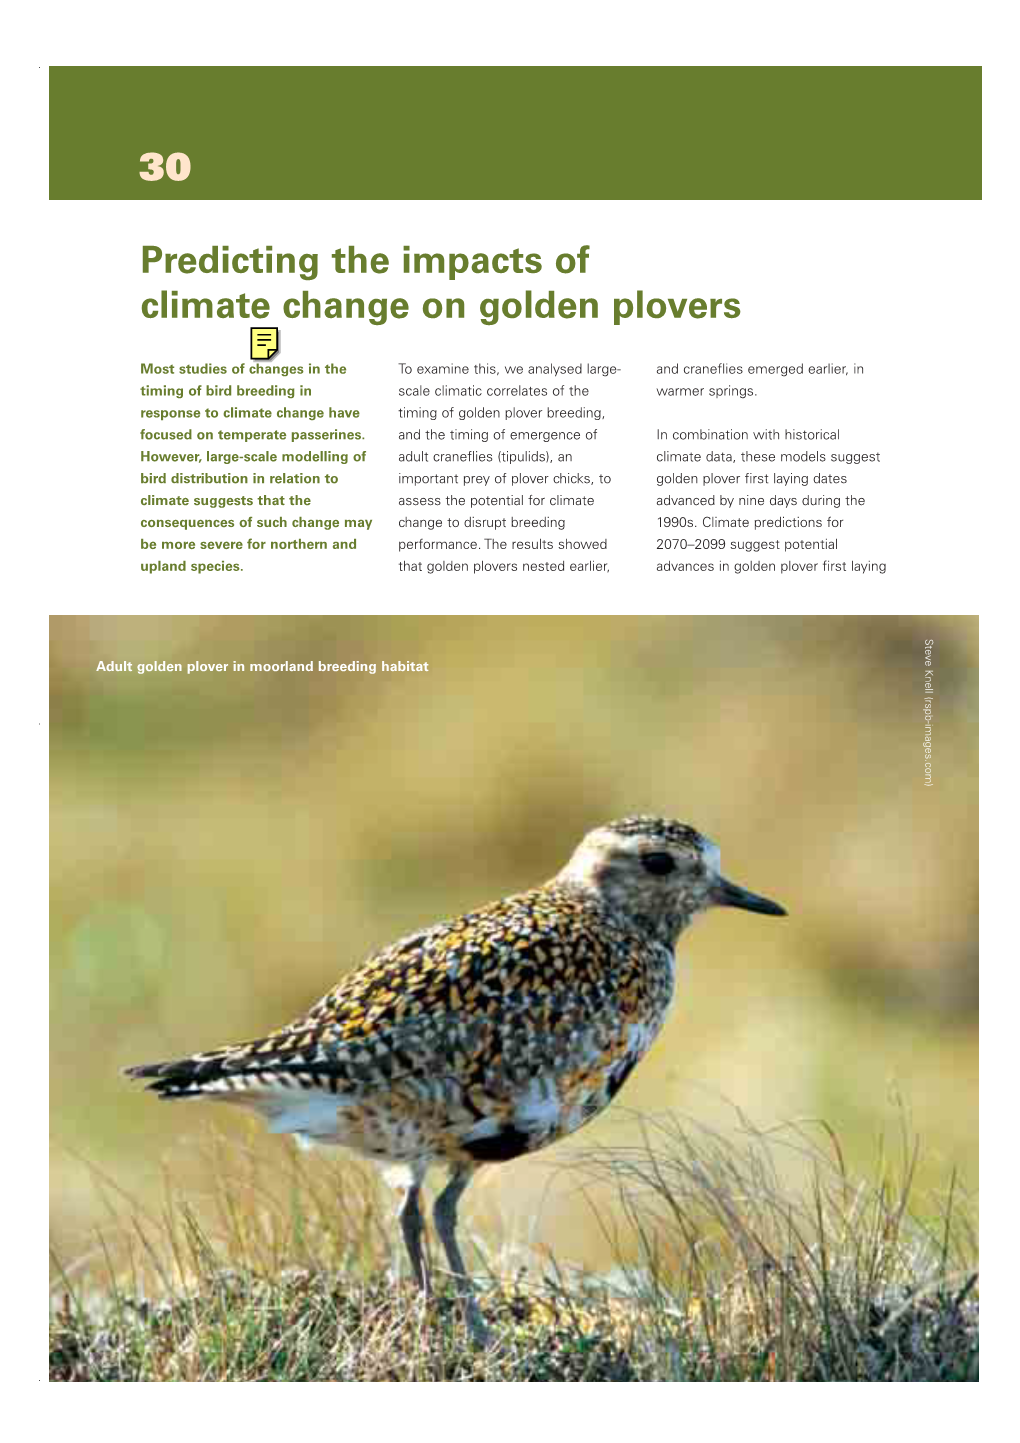 Predicting the Impacts of Climate Change on Golden Plovers